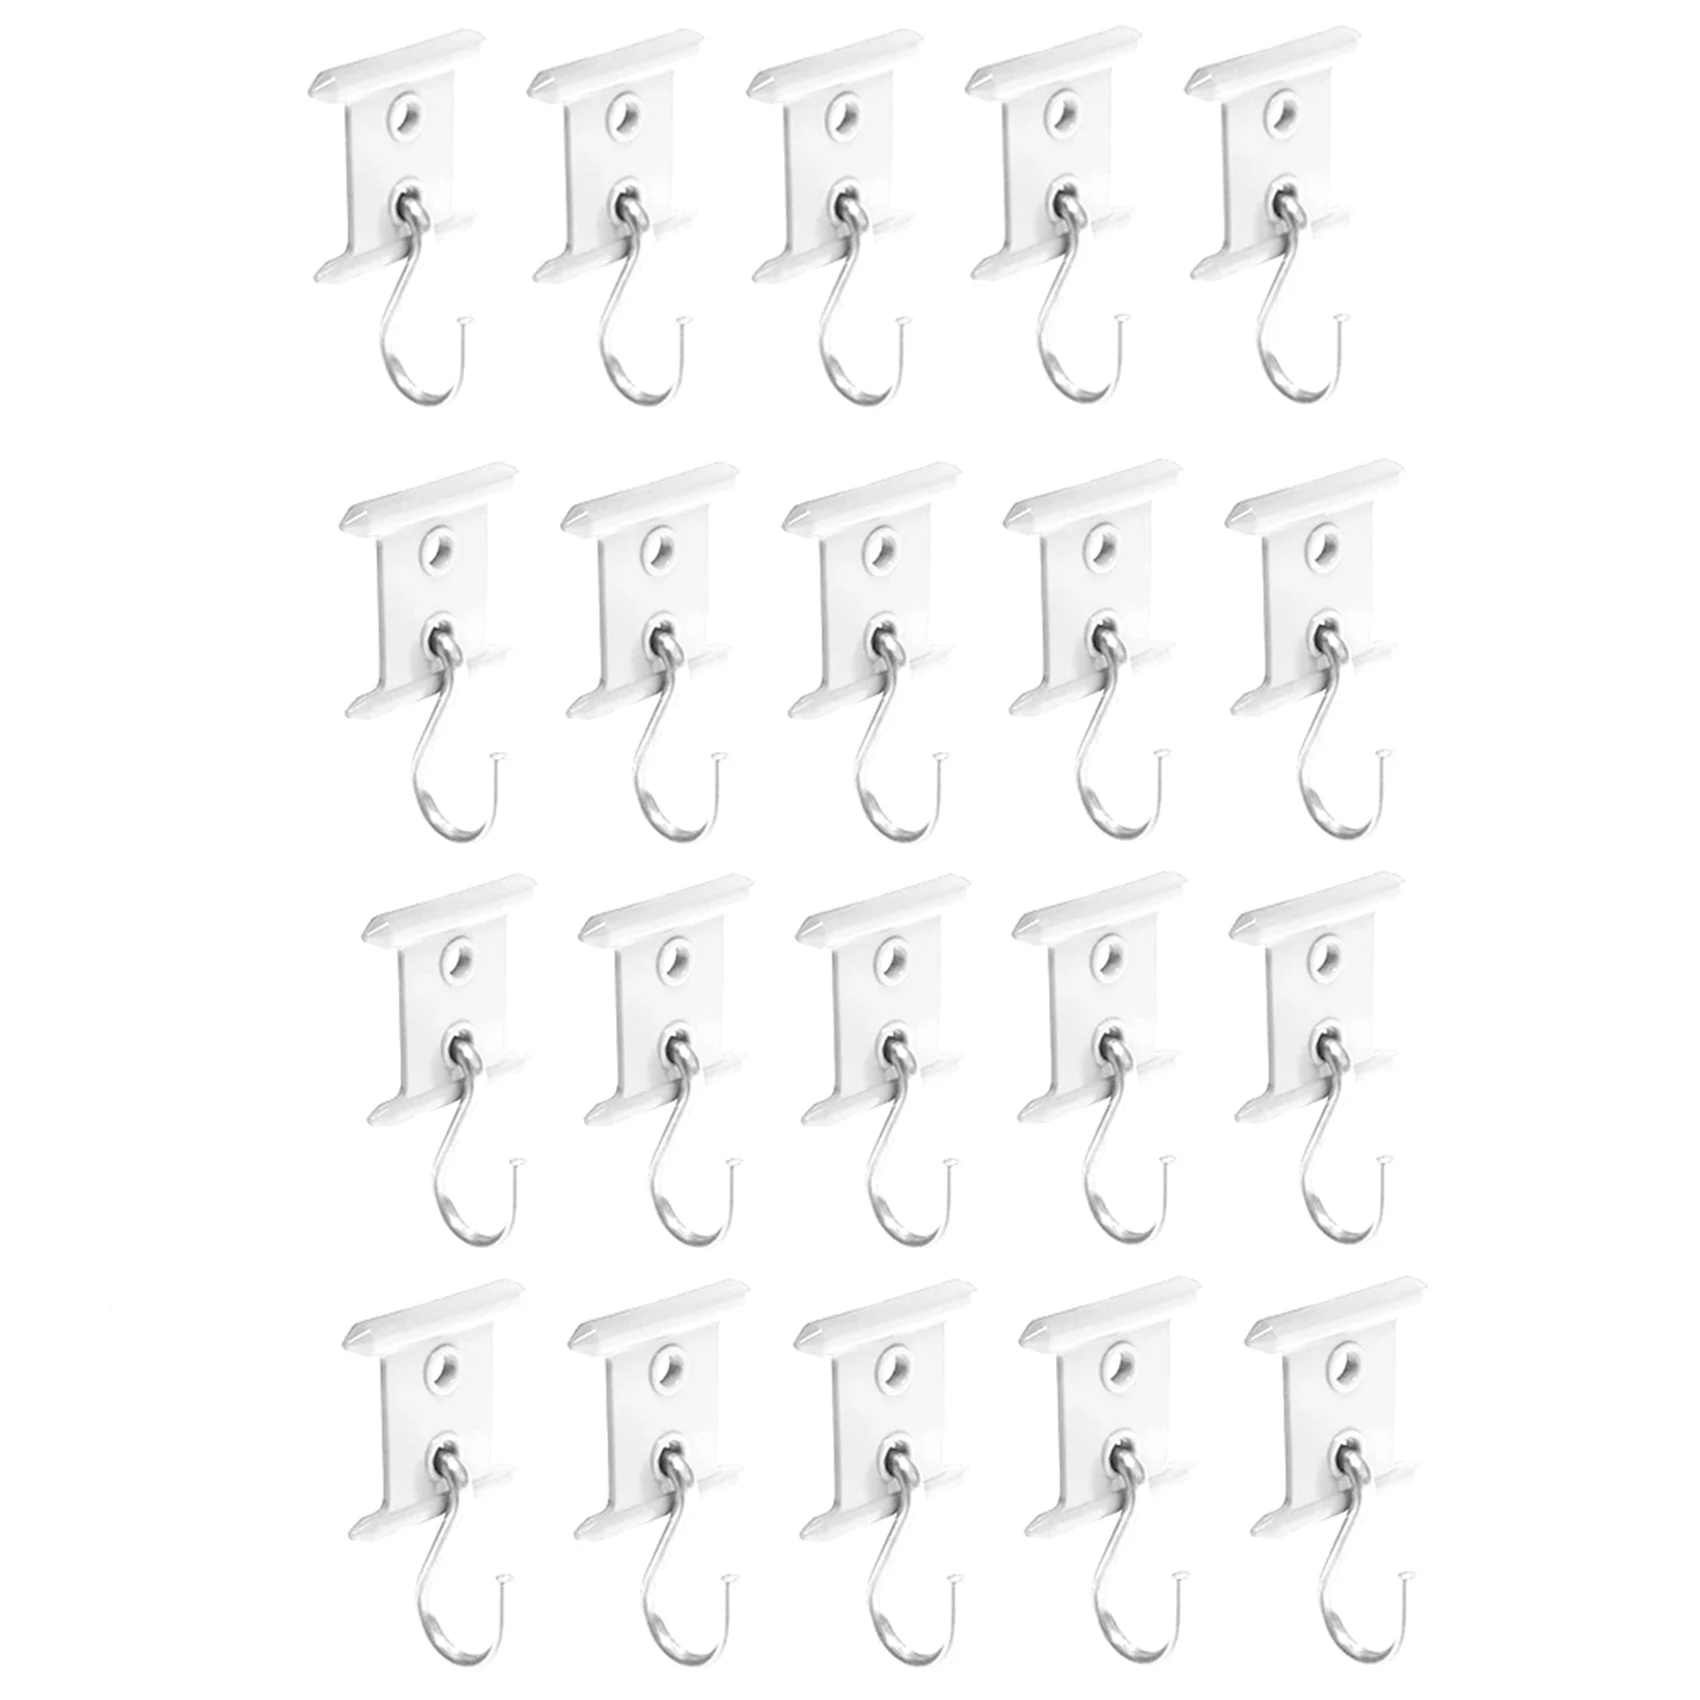 

20PC Camping Awning Hook RV Awning Hangers Hooks RV Party Light Hangers for Christmas Party Caravan Travel Trailer White